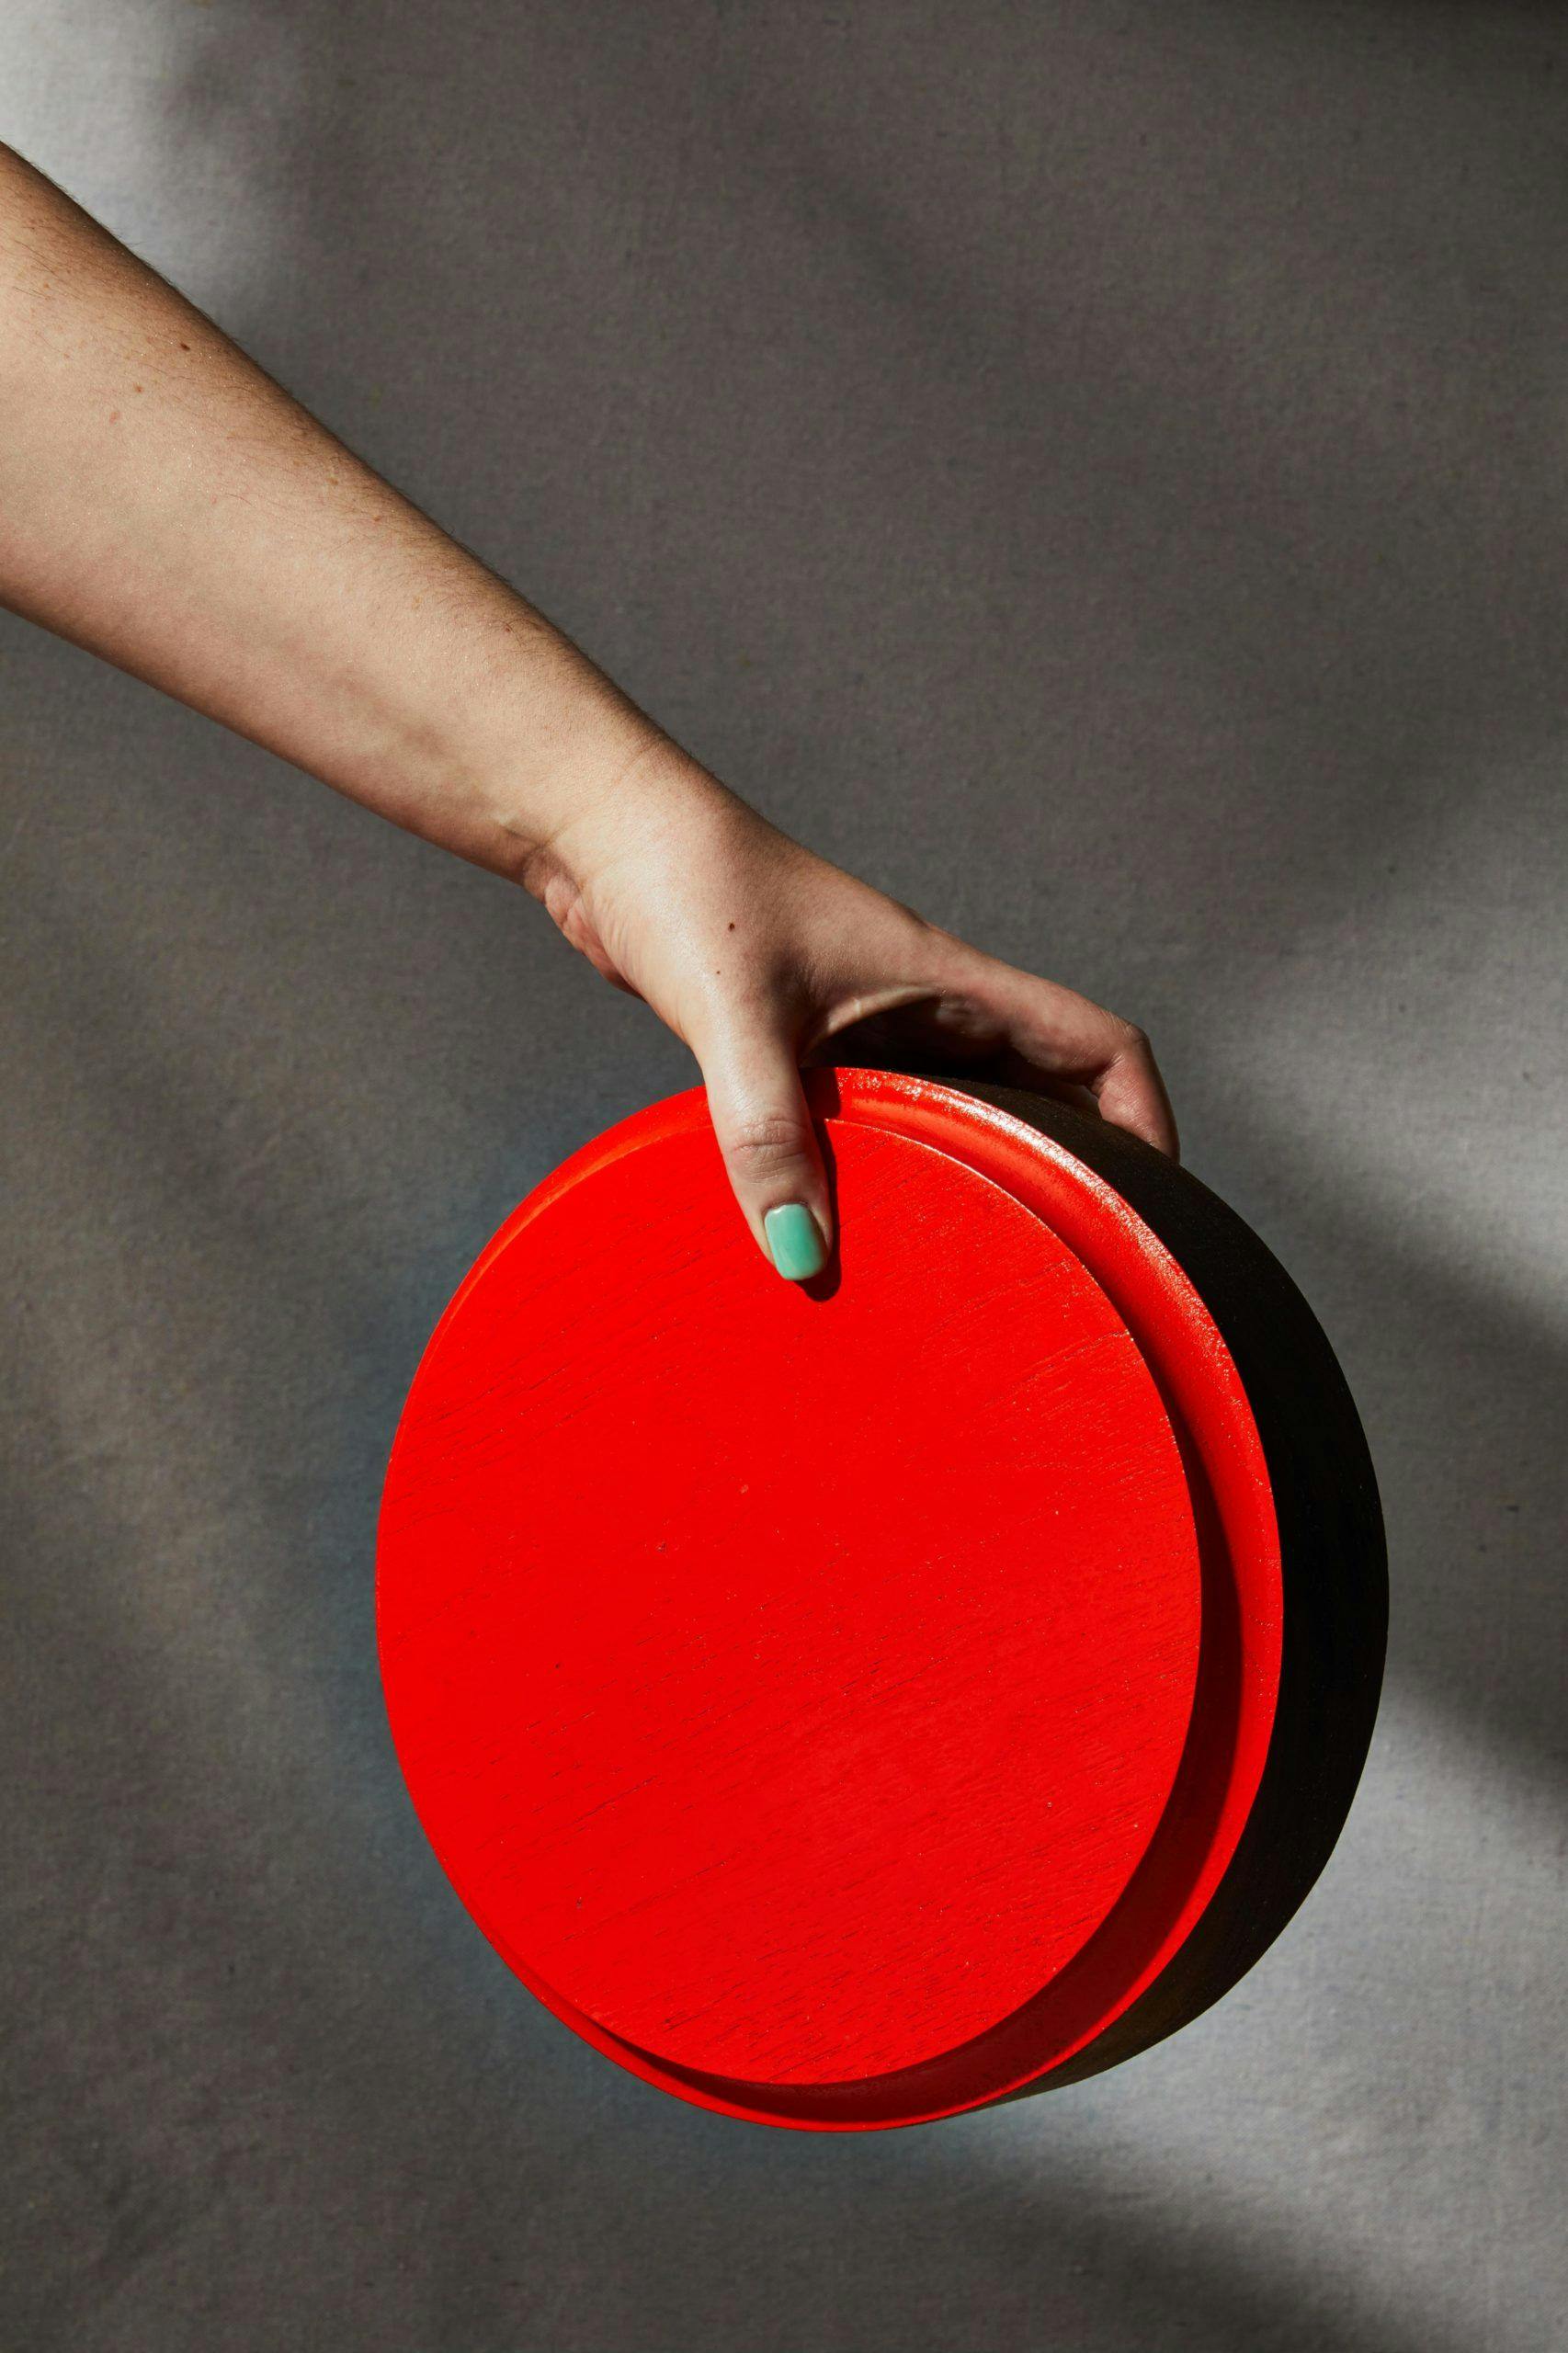 Hand holding a red plate against a gray background